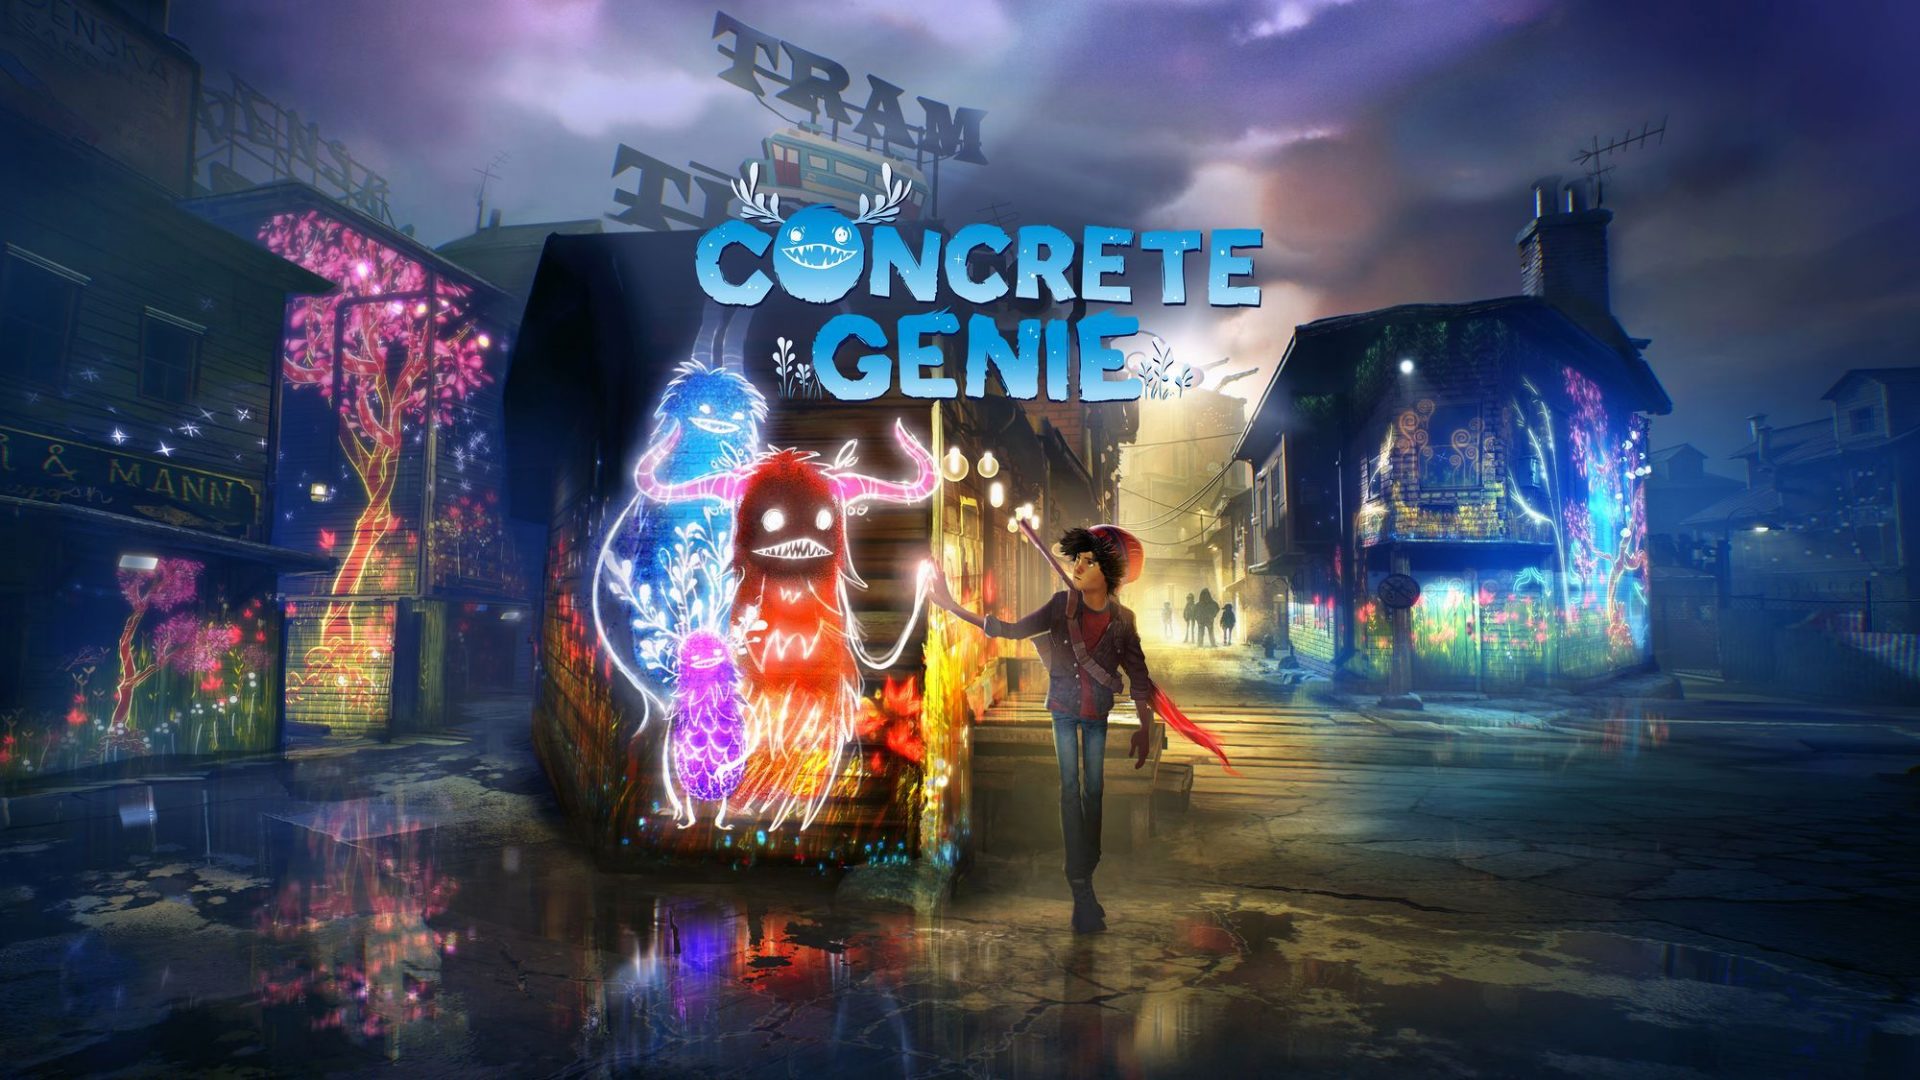 REVIEW: Concrete Genie (PS4) is an explosion of colors in a dark world